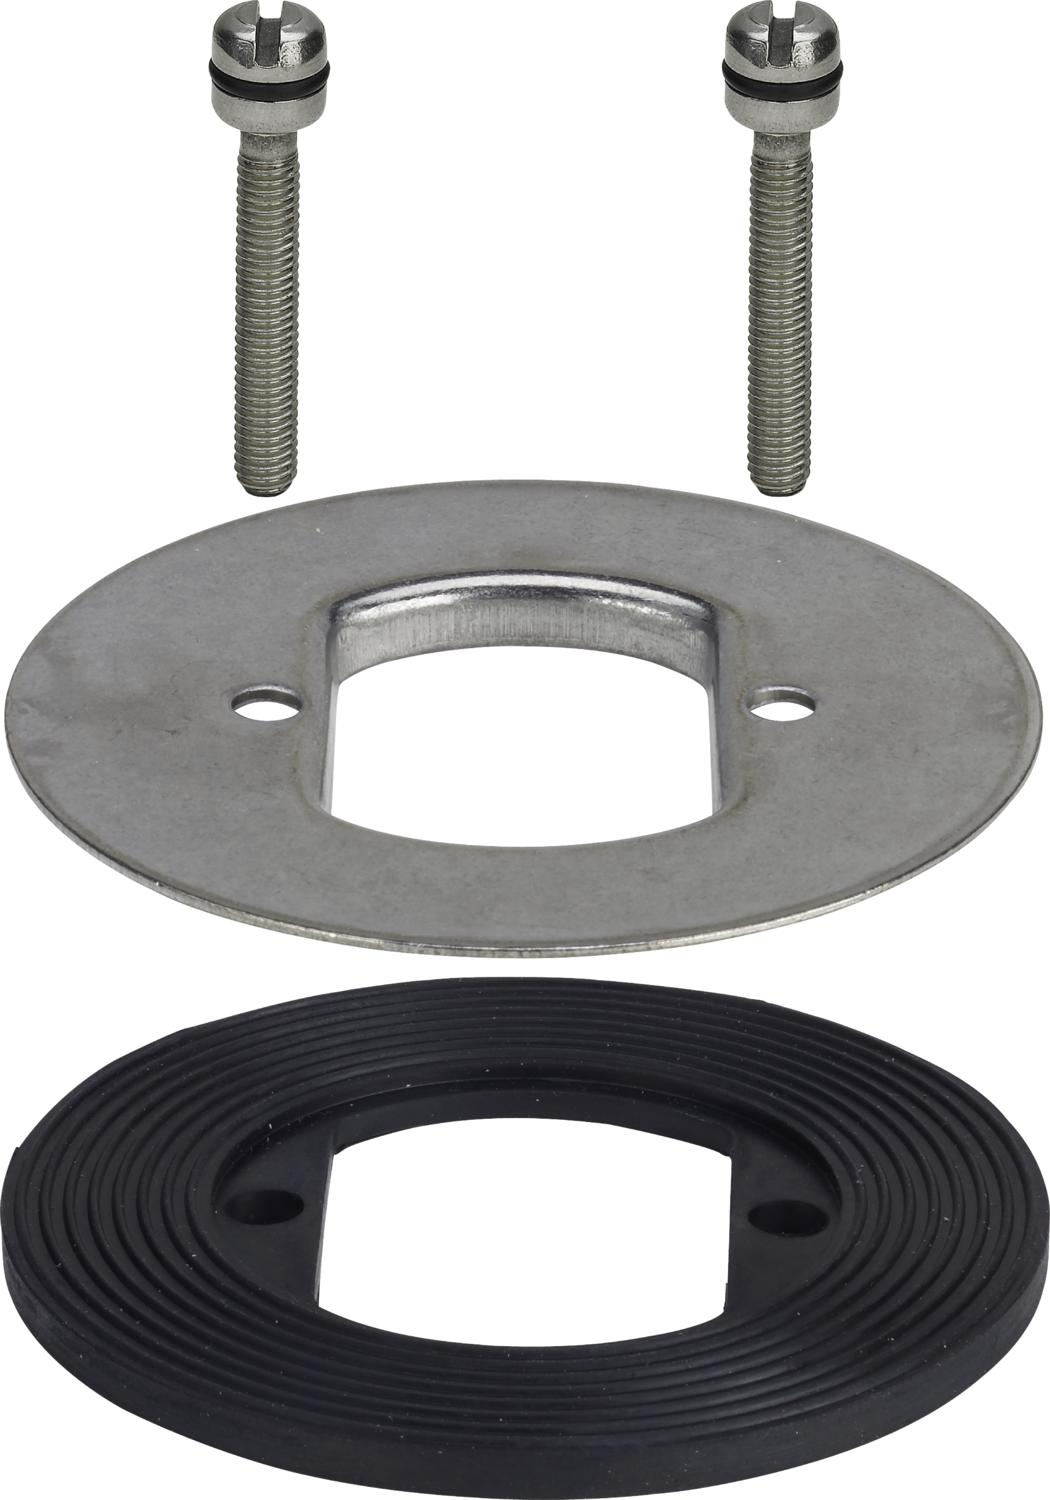 Screws, flange and gasket for TEMPOPLEX shower strainer with 65mm hole